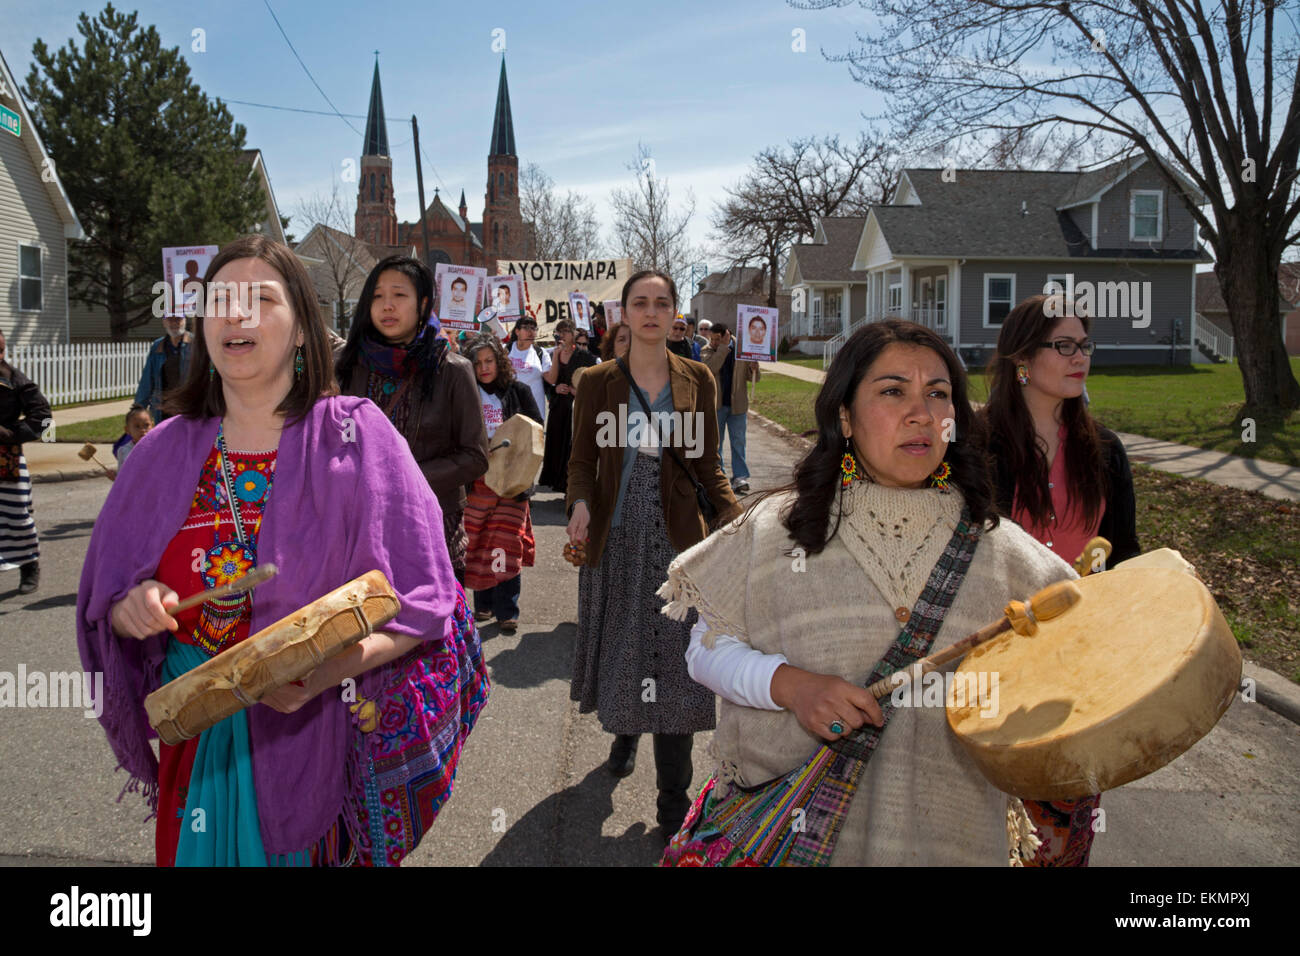 Detroit, Michigan, USA. 12th April, 2015. Demonstrators marched through Detroit's Mexican-American neighborhood to protest the September 2014 disappearance of 43 teachers college students in the southern Mexican state of Guerrero. The students from Ayotzinapa Teacher Training College were apparently arrested by local police who handed them over to a drug gang. Relatives of the disappeared joined the protest; they are traveling to cities across the U.S. to tell their story. Credit:  Jim West/Alamy Live News Stock Photo